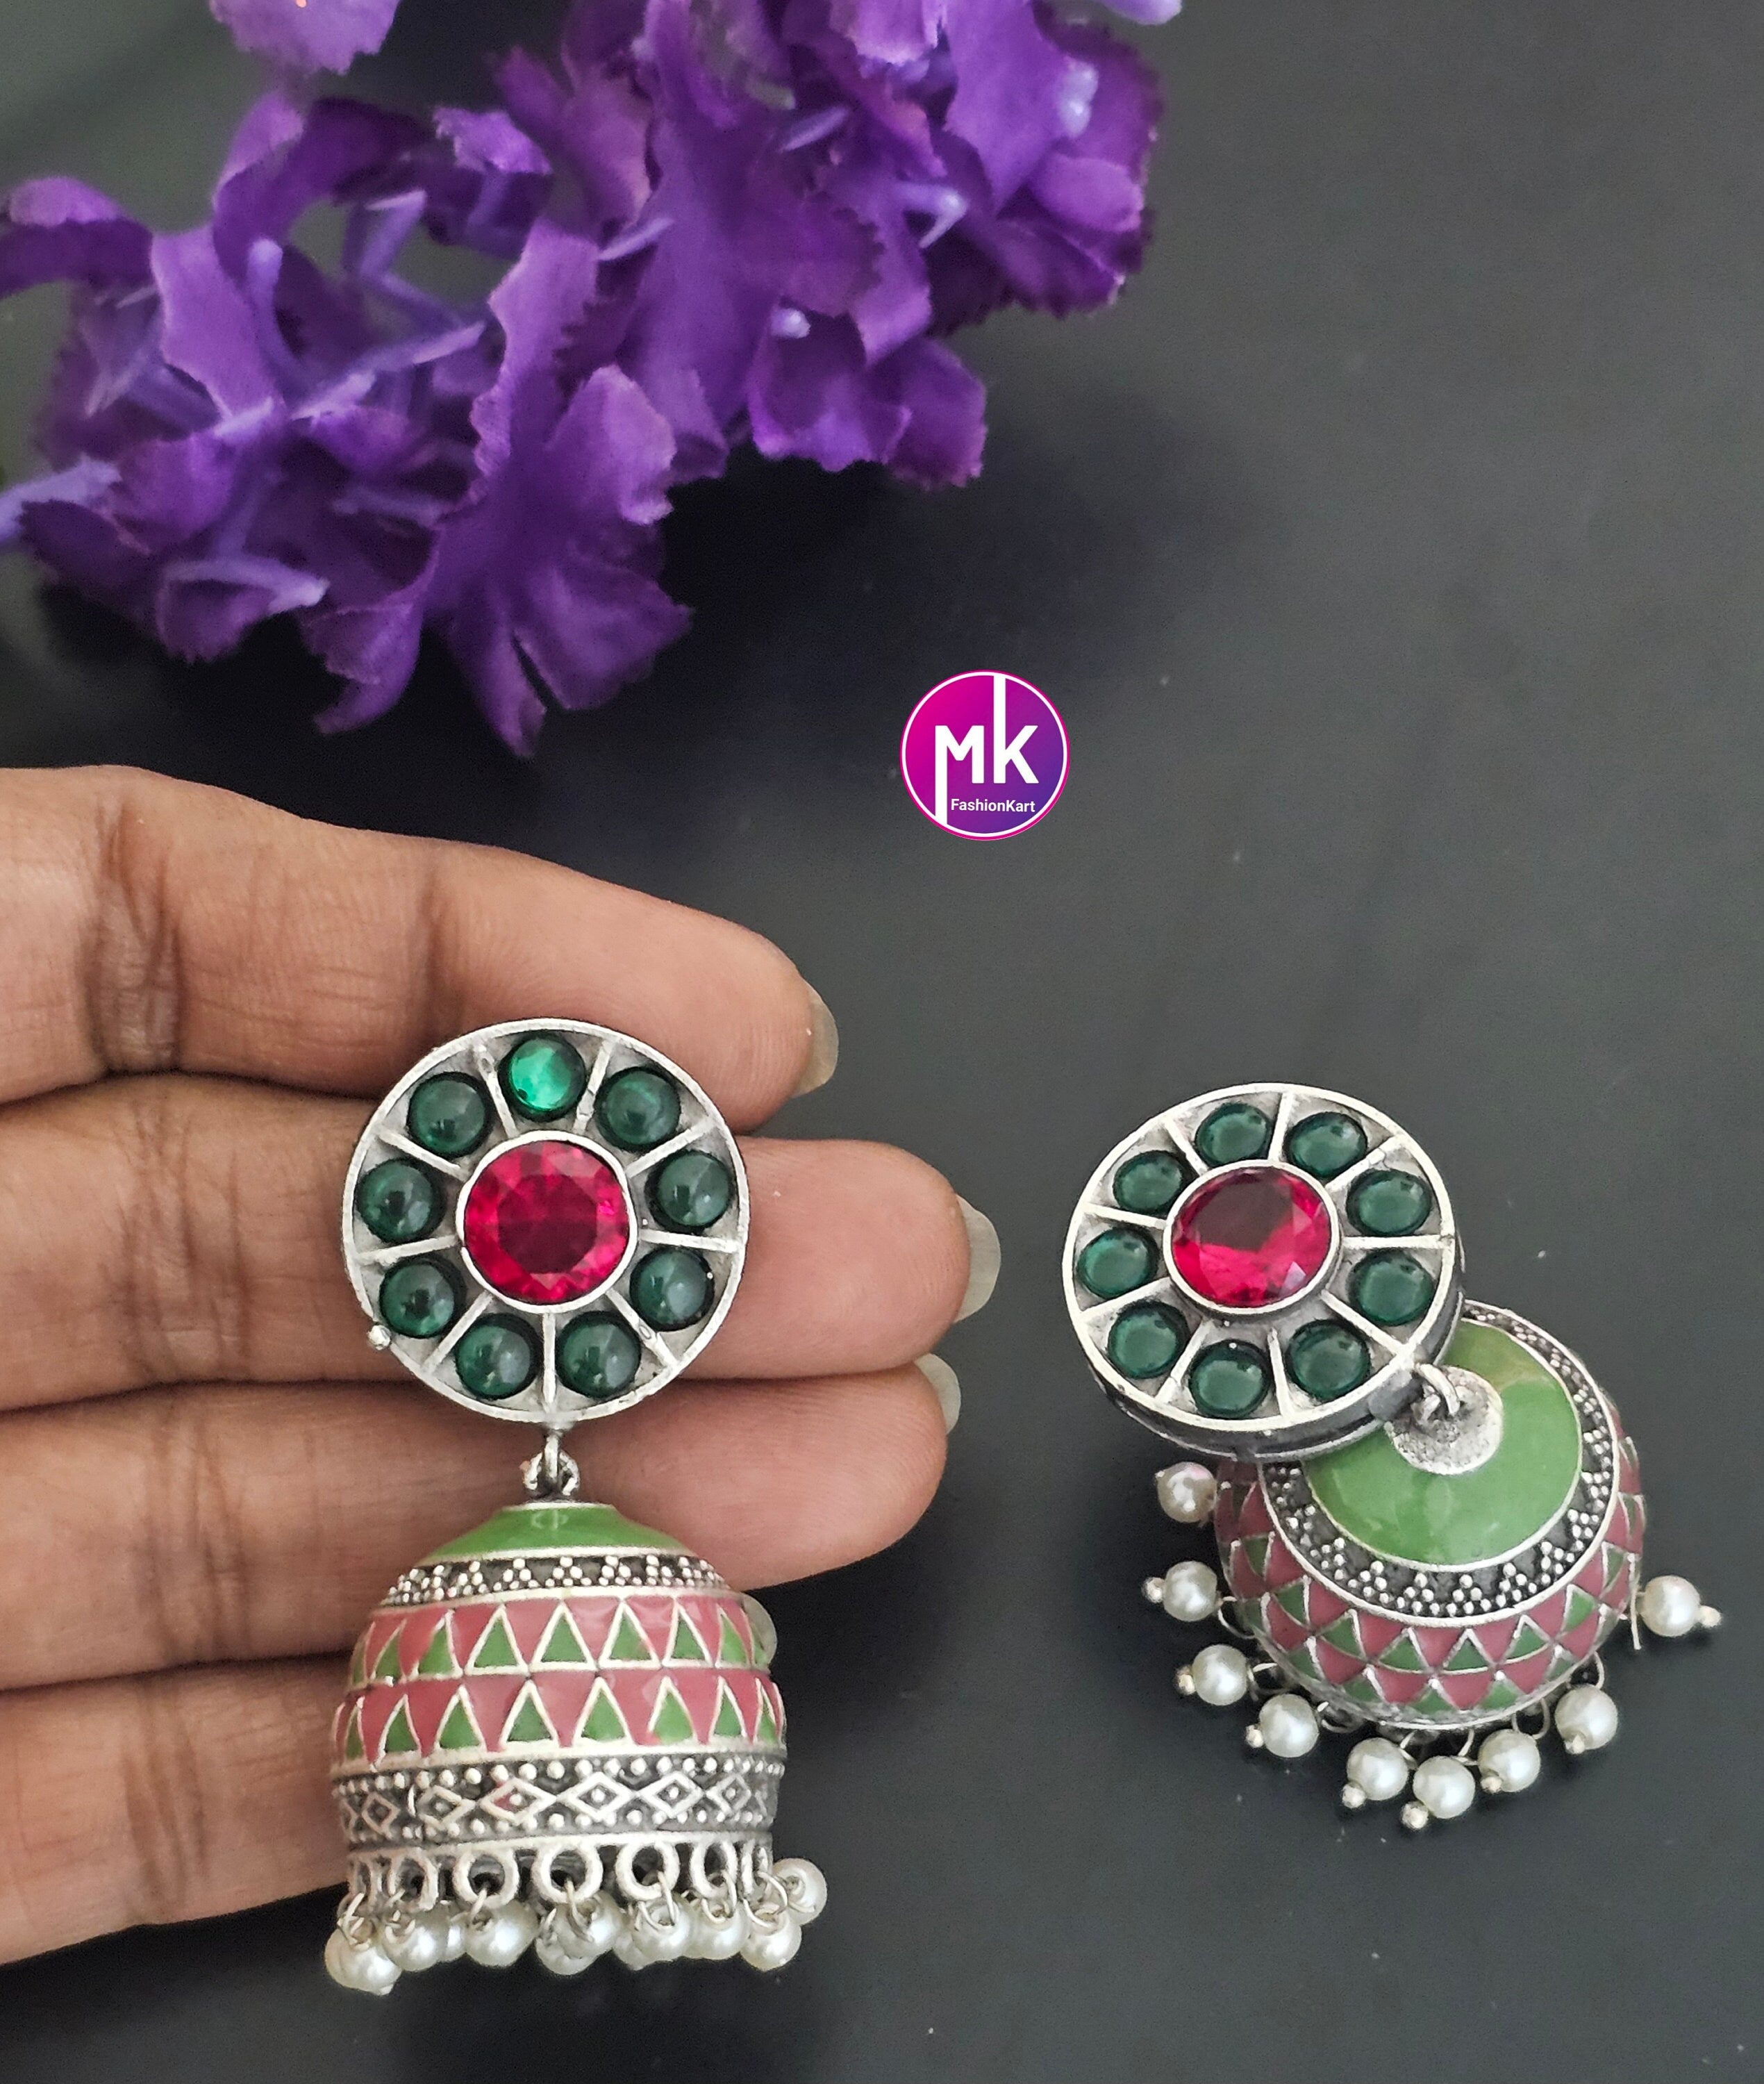 Premium Quality Multi-color German Silver Jhumka with AD stones and hanging white pearls